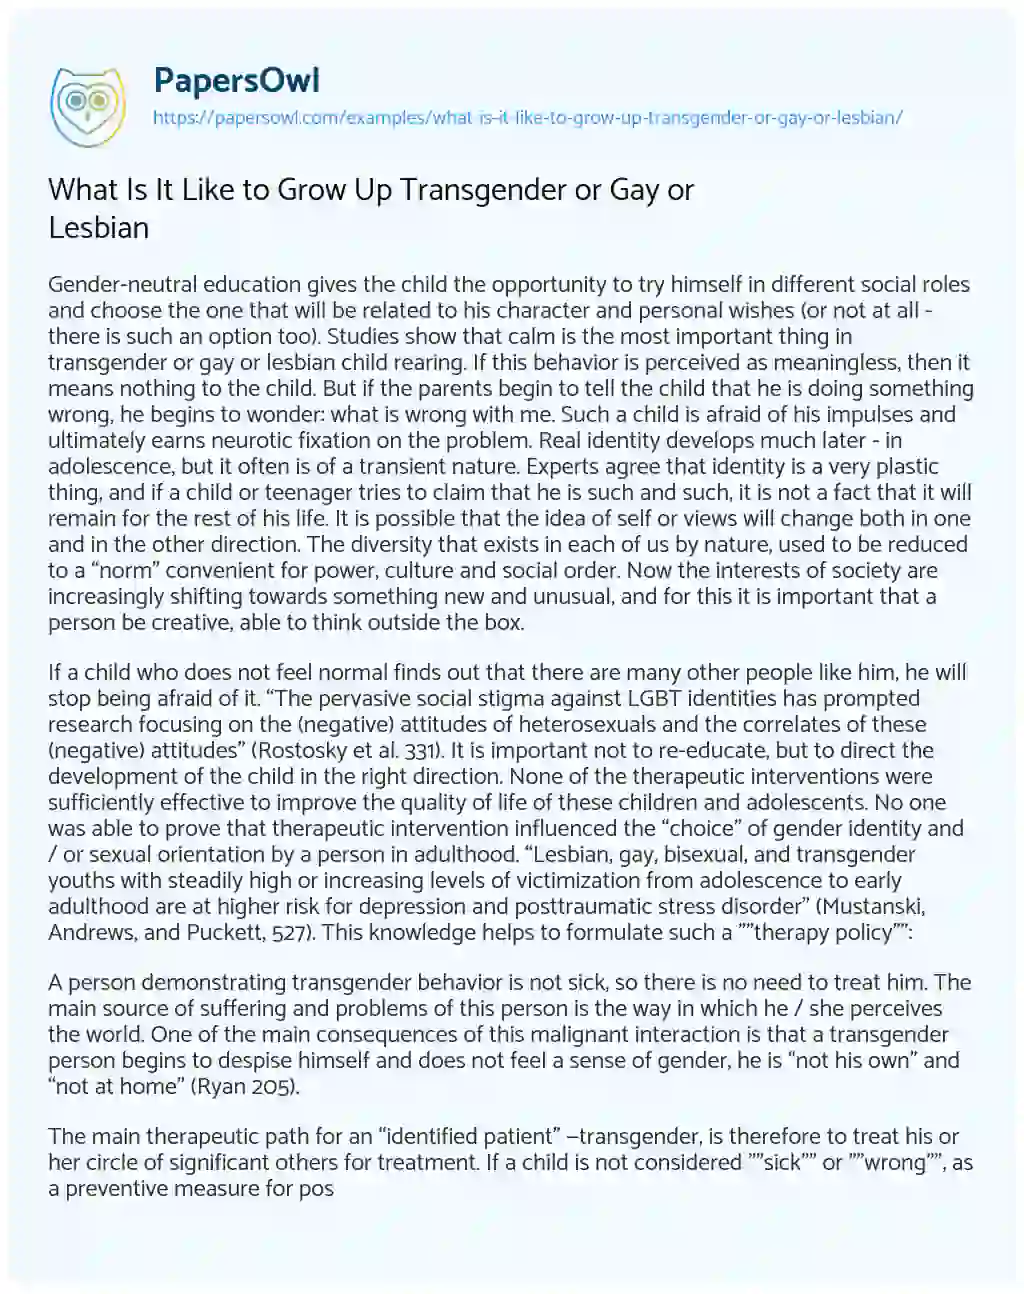 Essay on What is it Like to Grow up Transgender or Gay or Lesbian